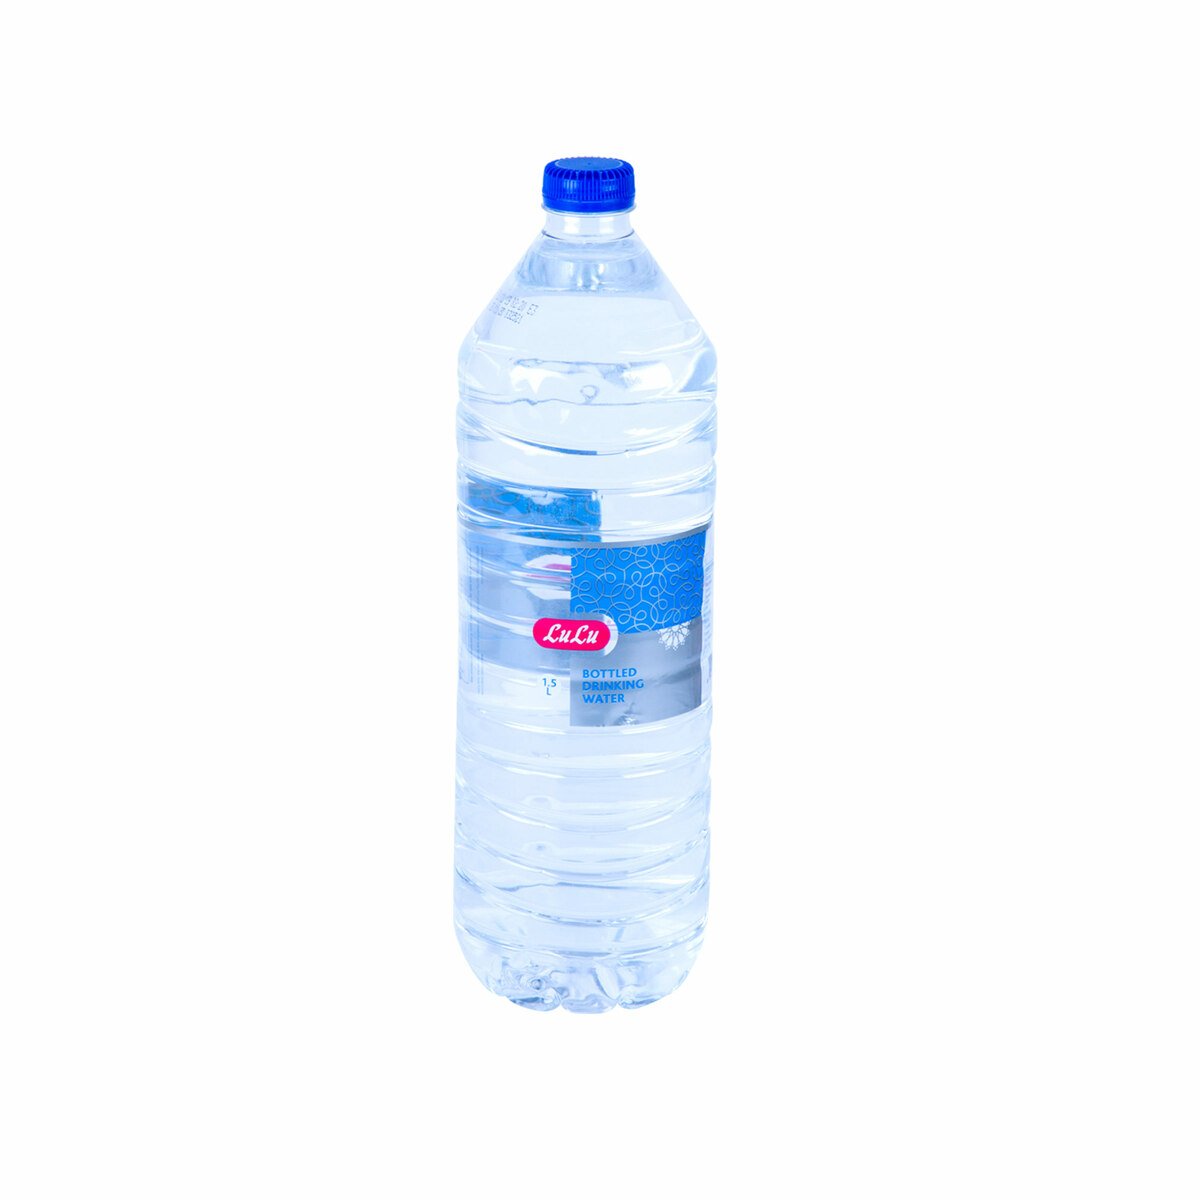 Lulu Natural Drinking Water 12 x 1.5 Litre